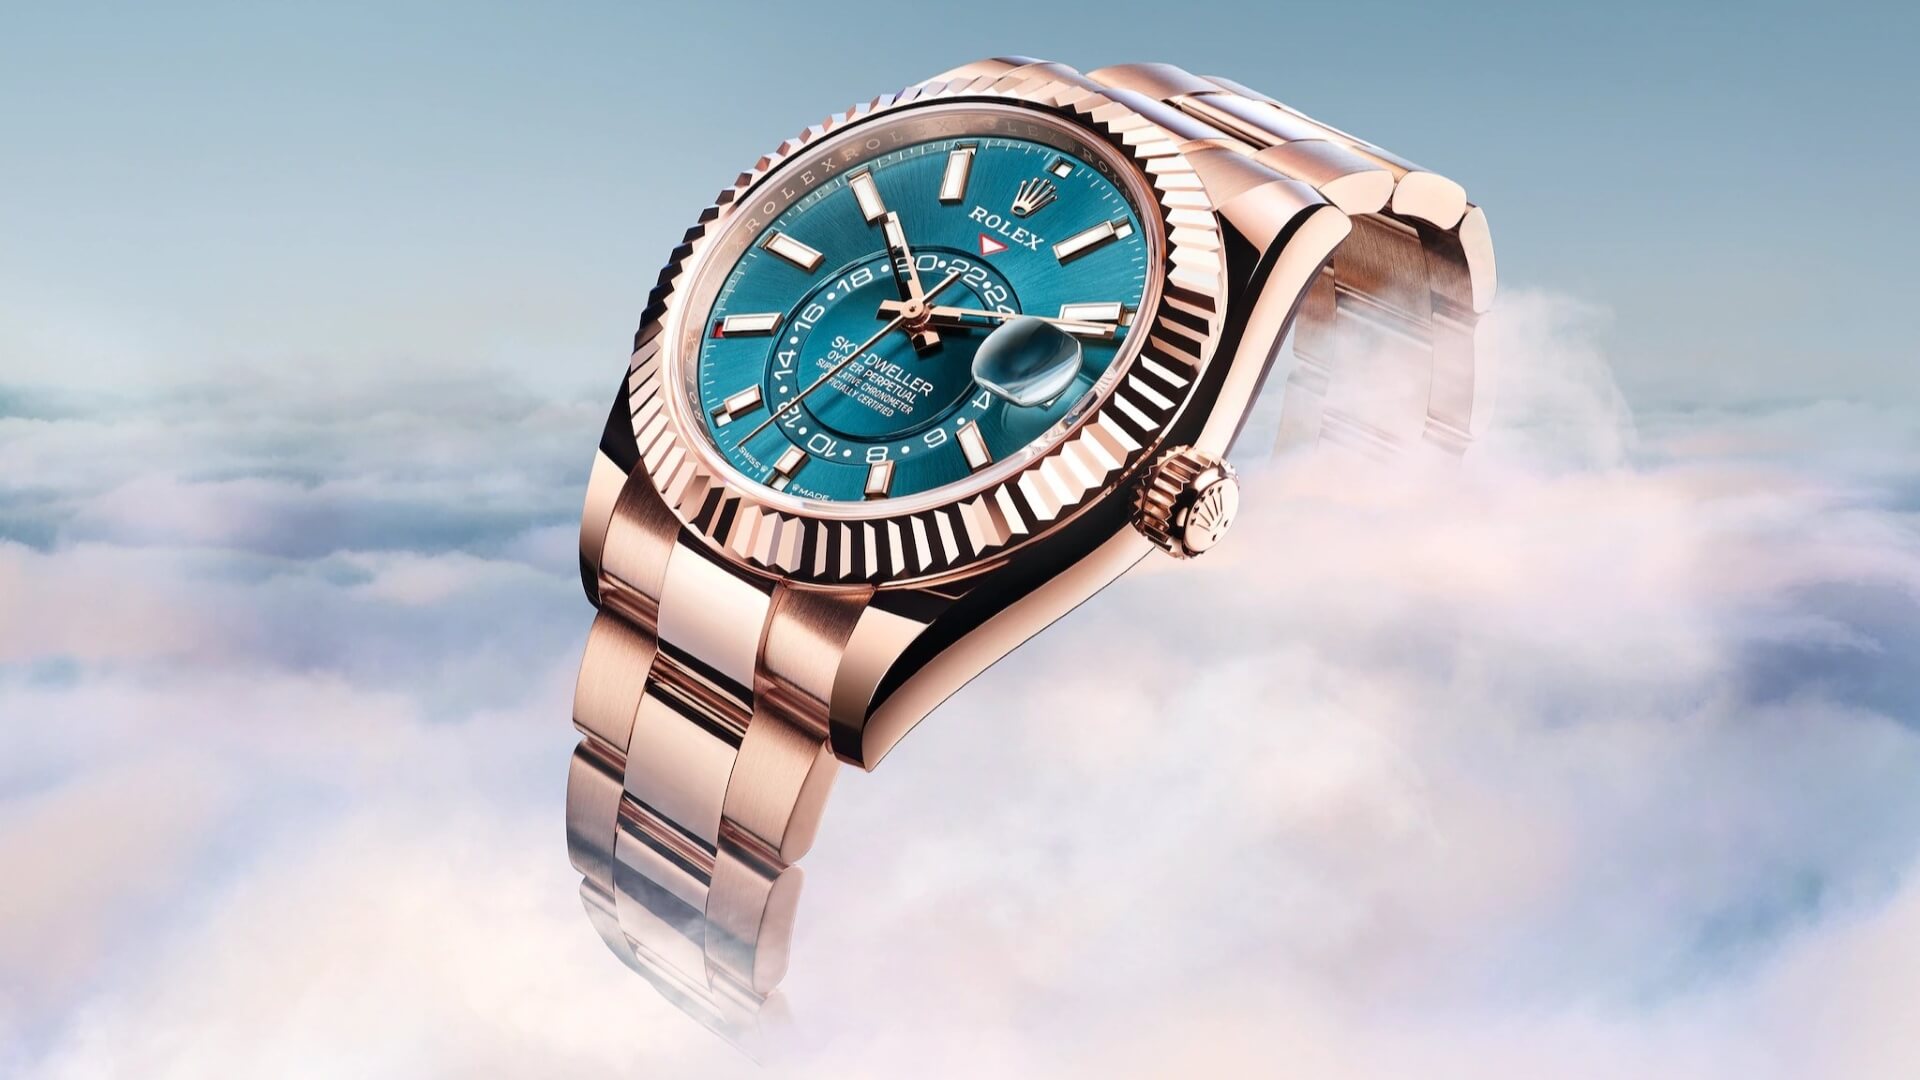 First Look: Rolex Releases New Watches Updated Movements | aBlogtoWatch